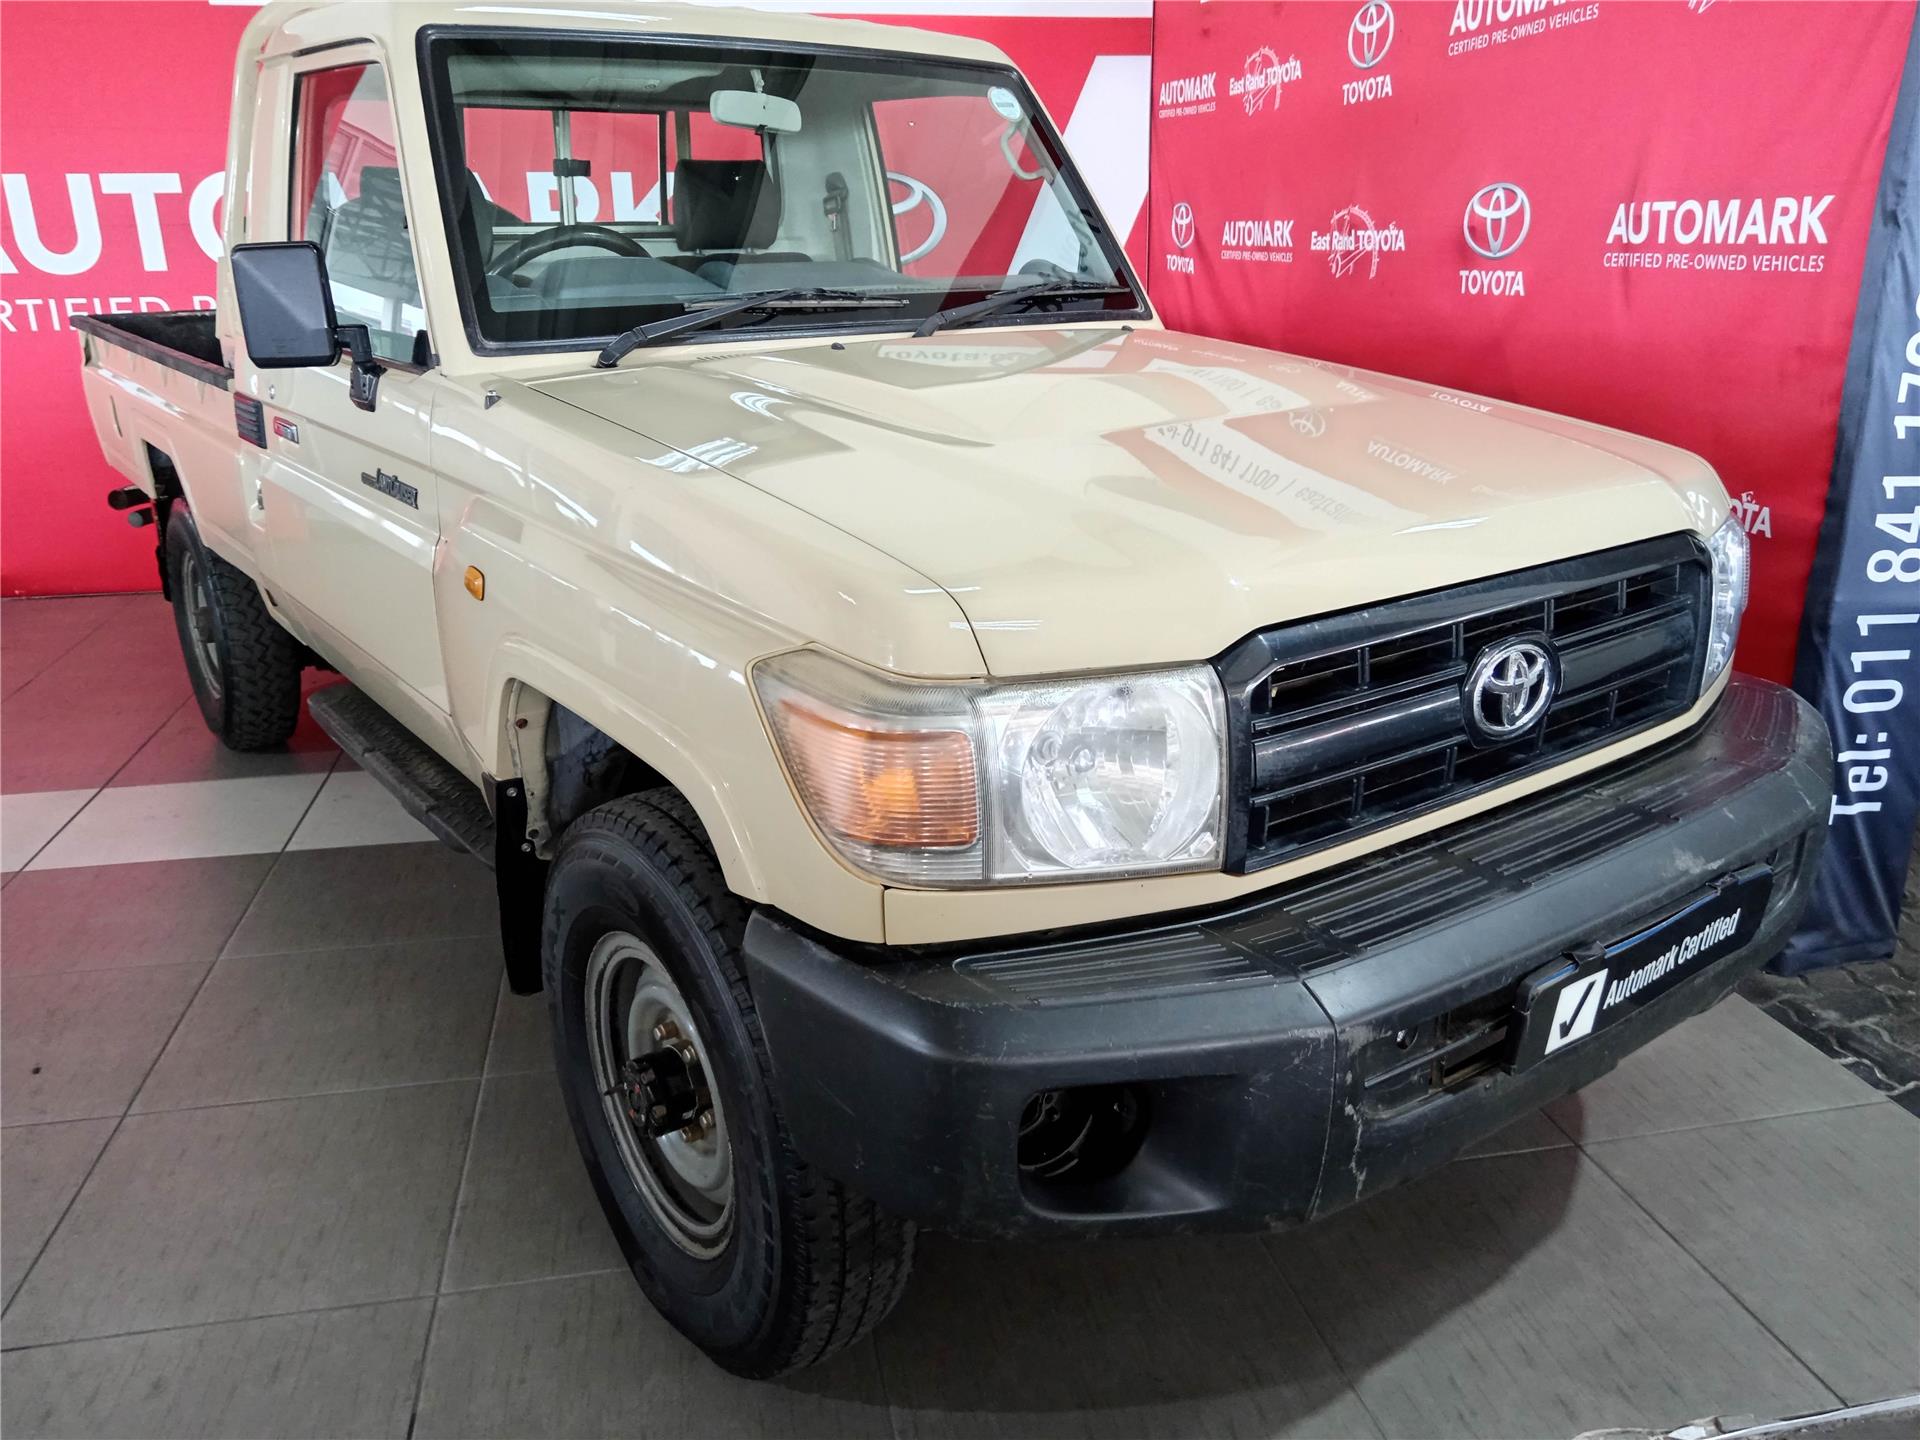 2012 Toyota Land Cruiser 79  for sale - 1185837/2